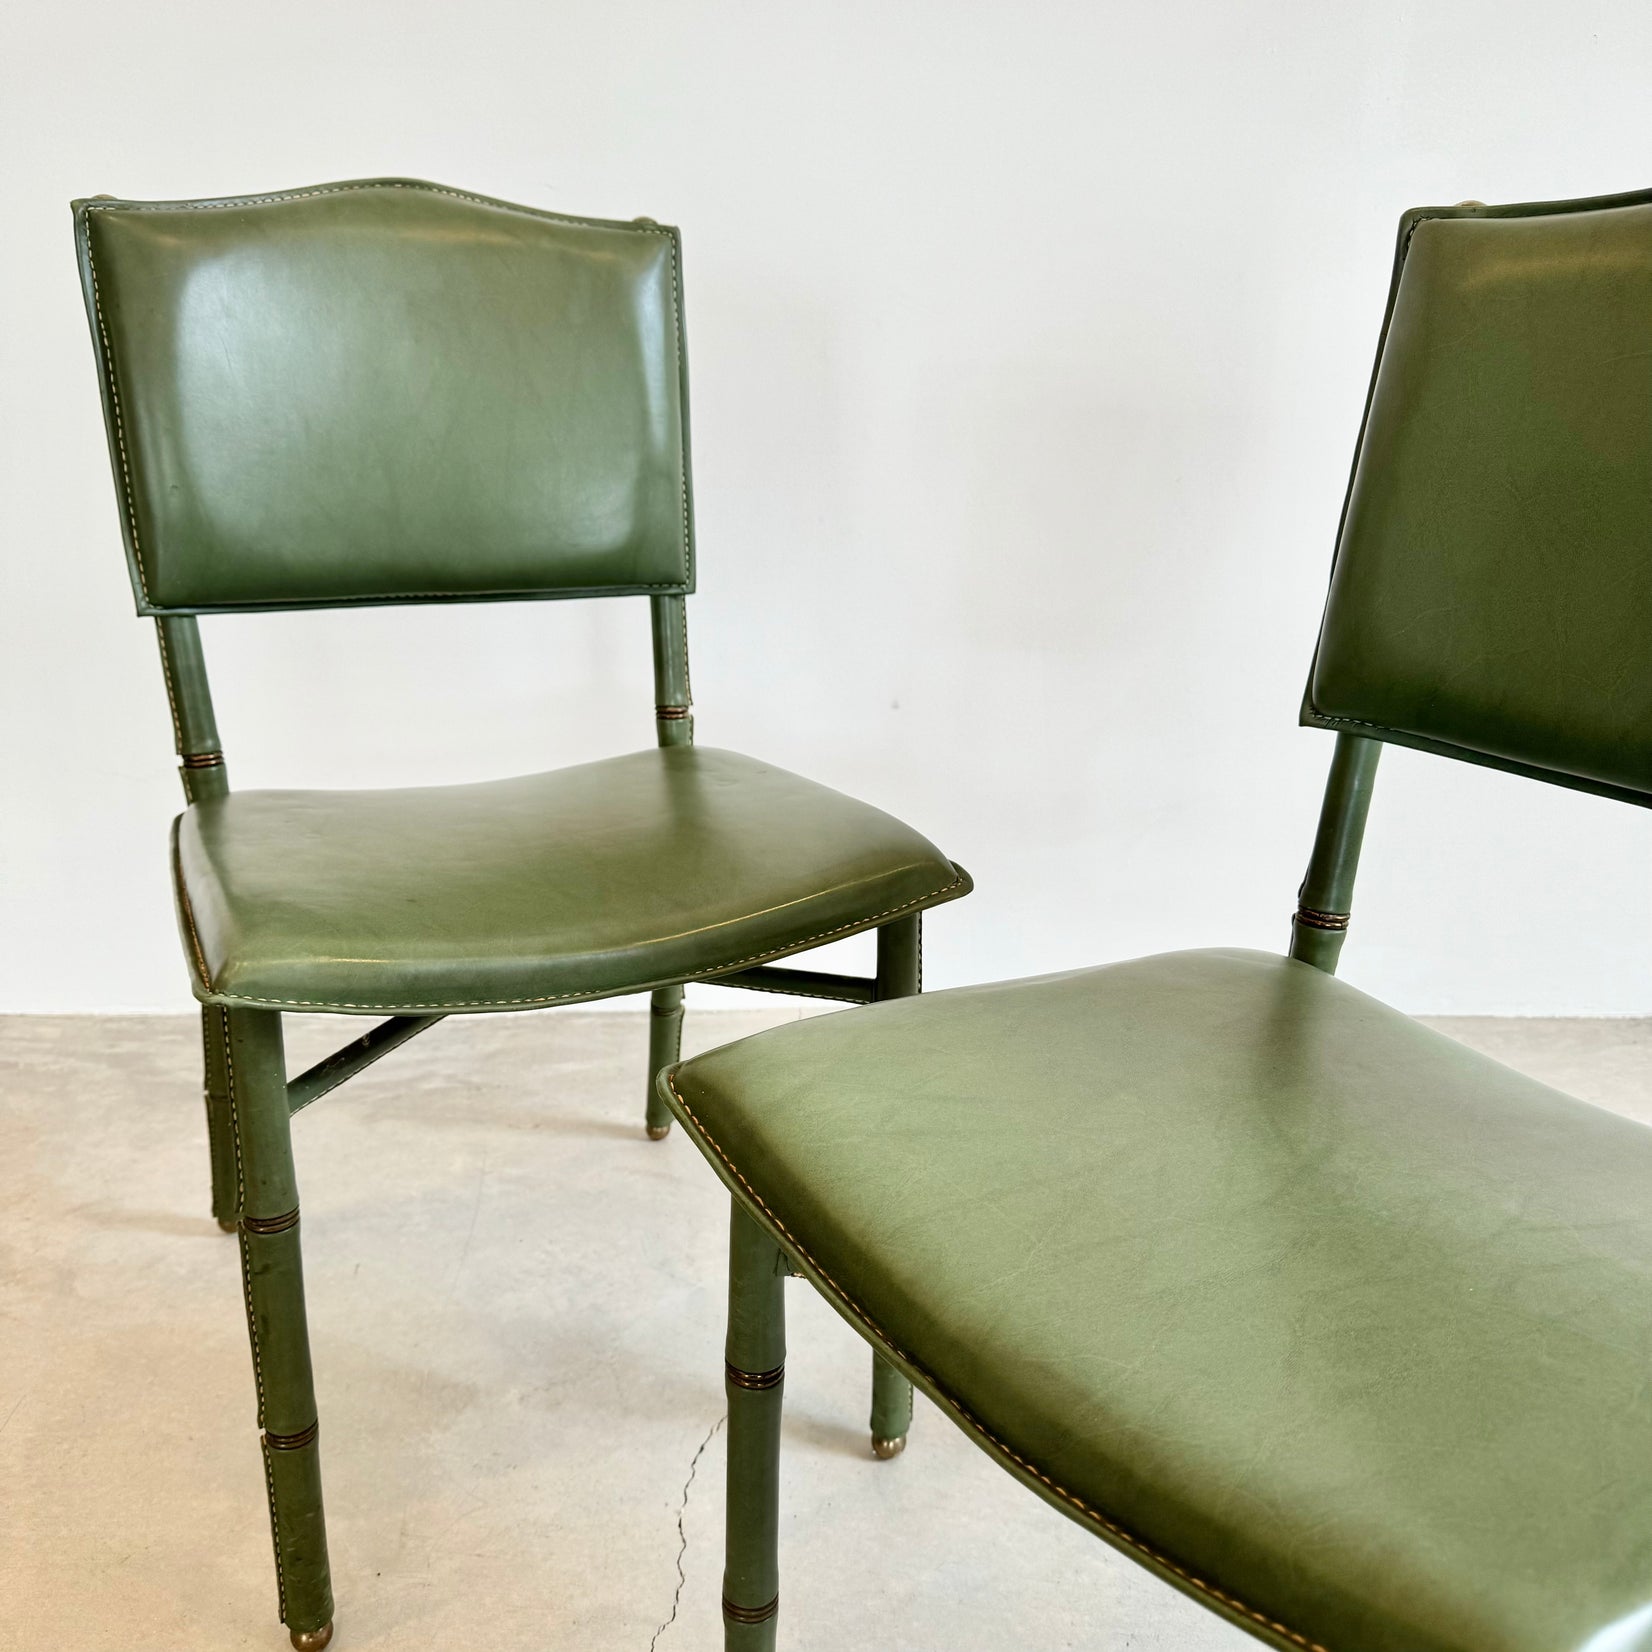 Jacques Adnet Green Leather Chairs, 1950s France